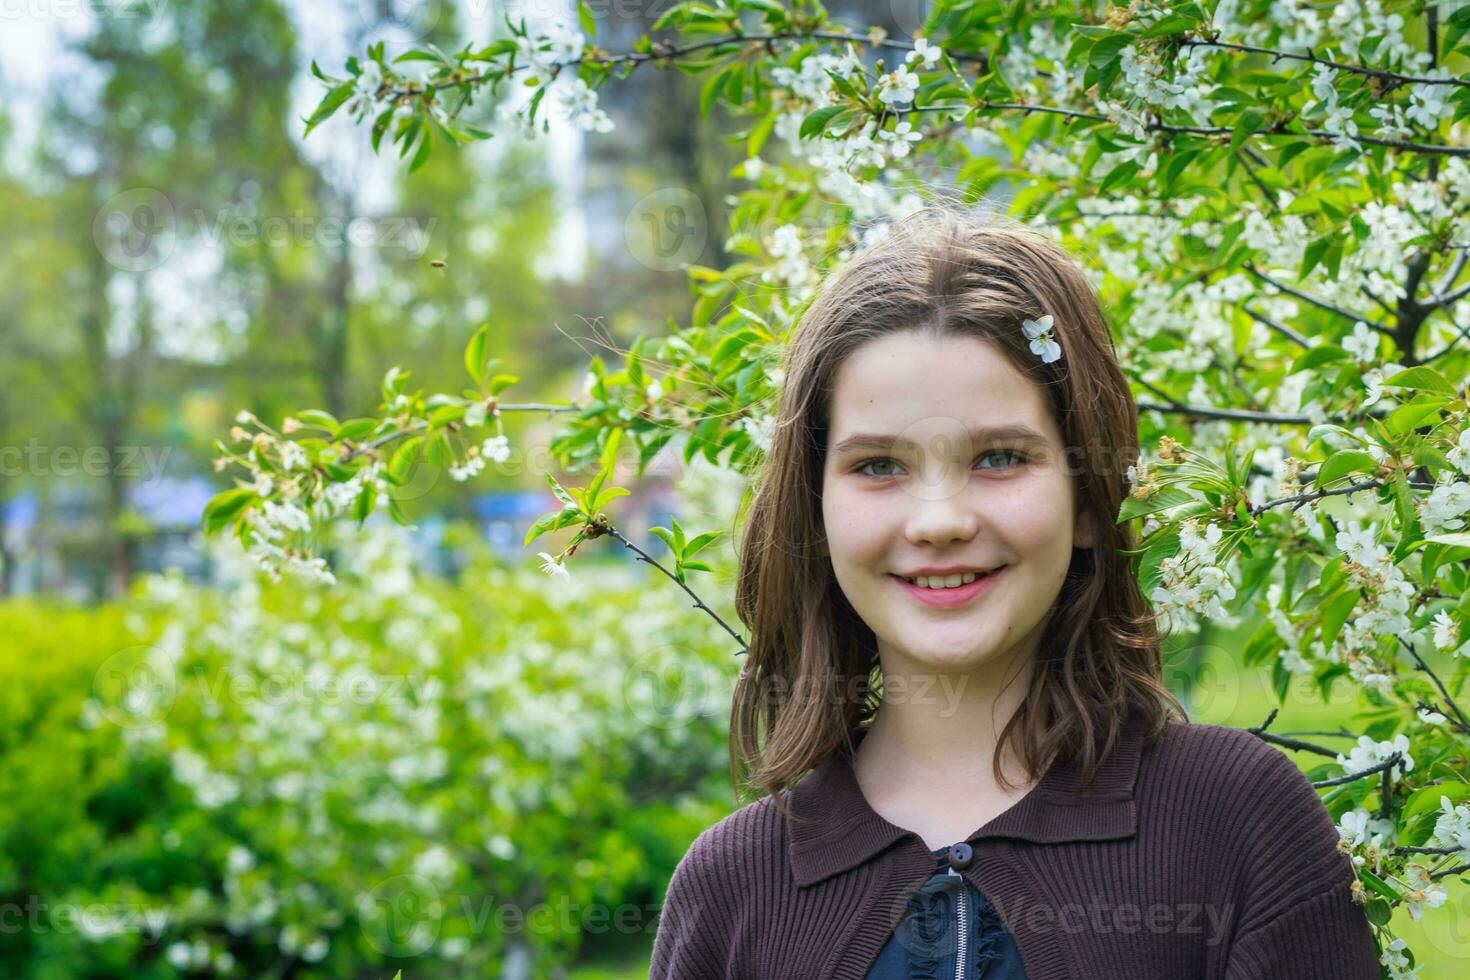 Beautiful girl among cherry flowers in spring. Portrait of a girl with brown hair and green eyes. photo